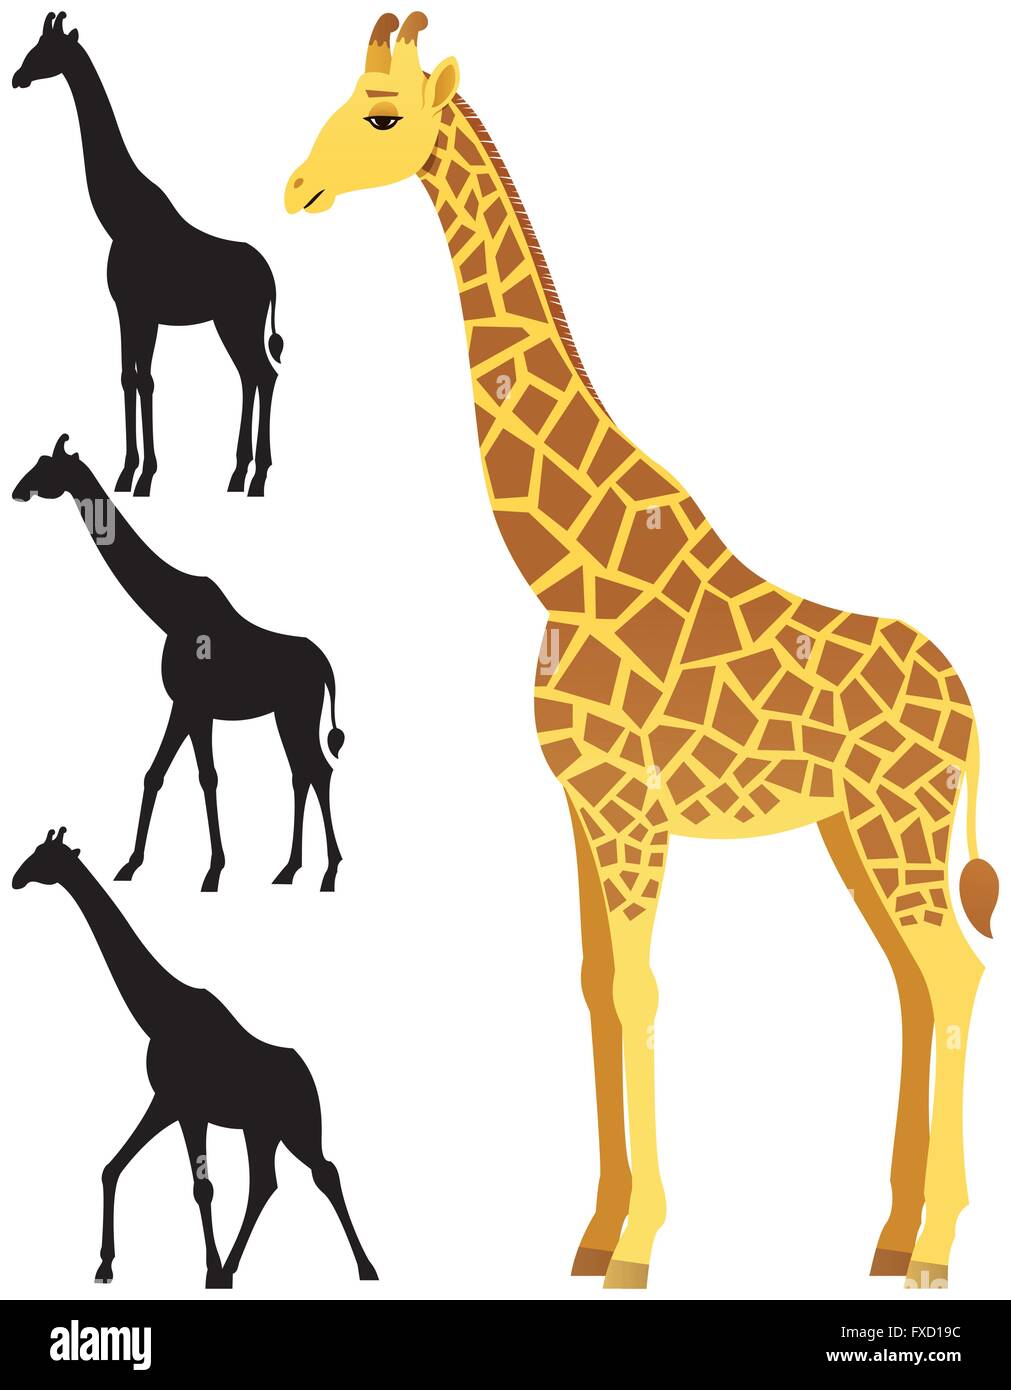 Illustration of giraffe over white background. 3 silhouette versions included. No transparency used. Basic (linear) gradients us Stock Vector